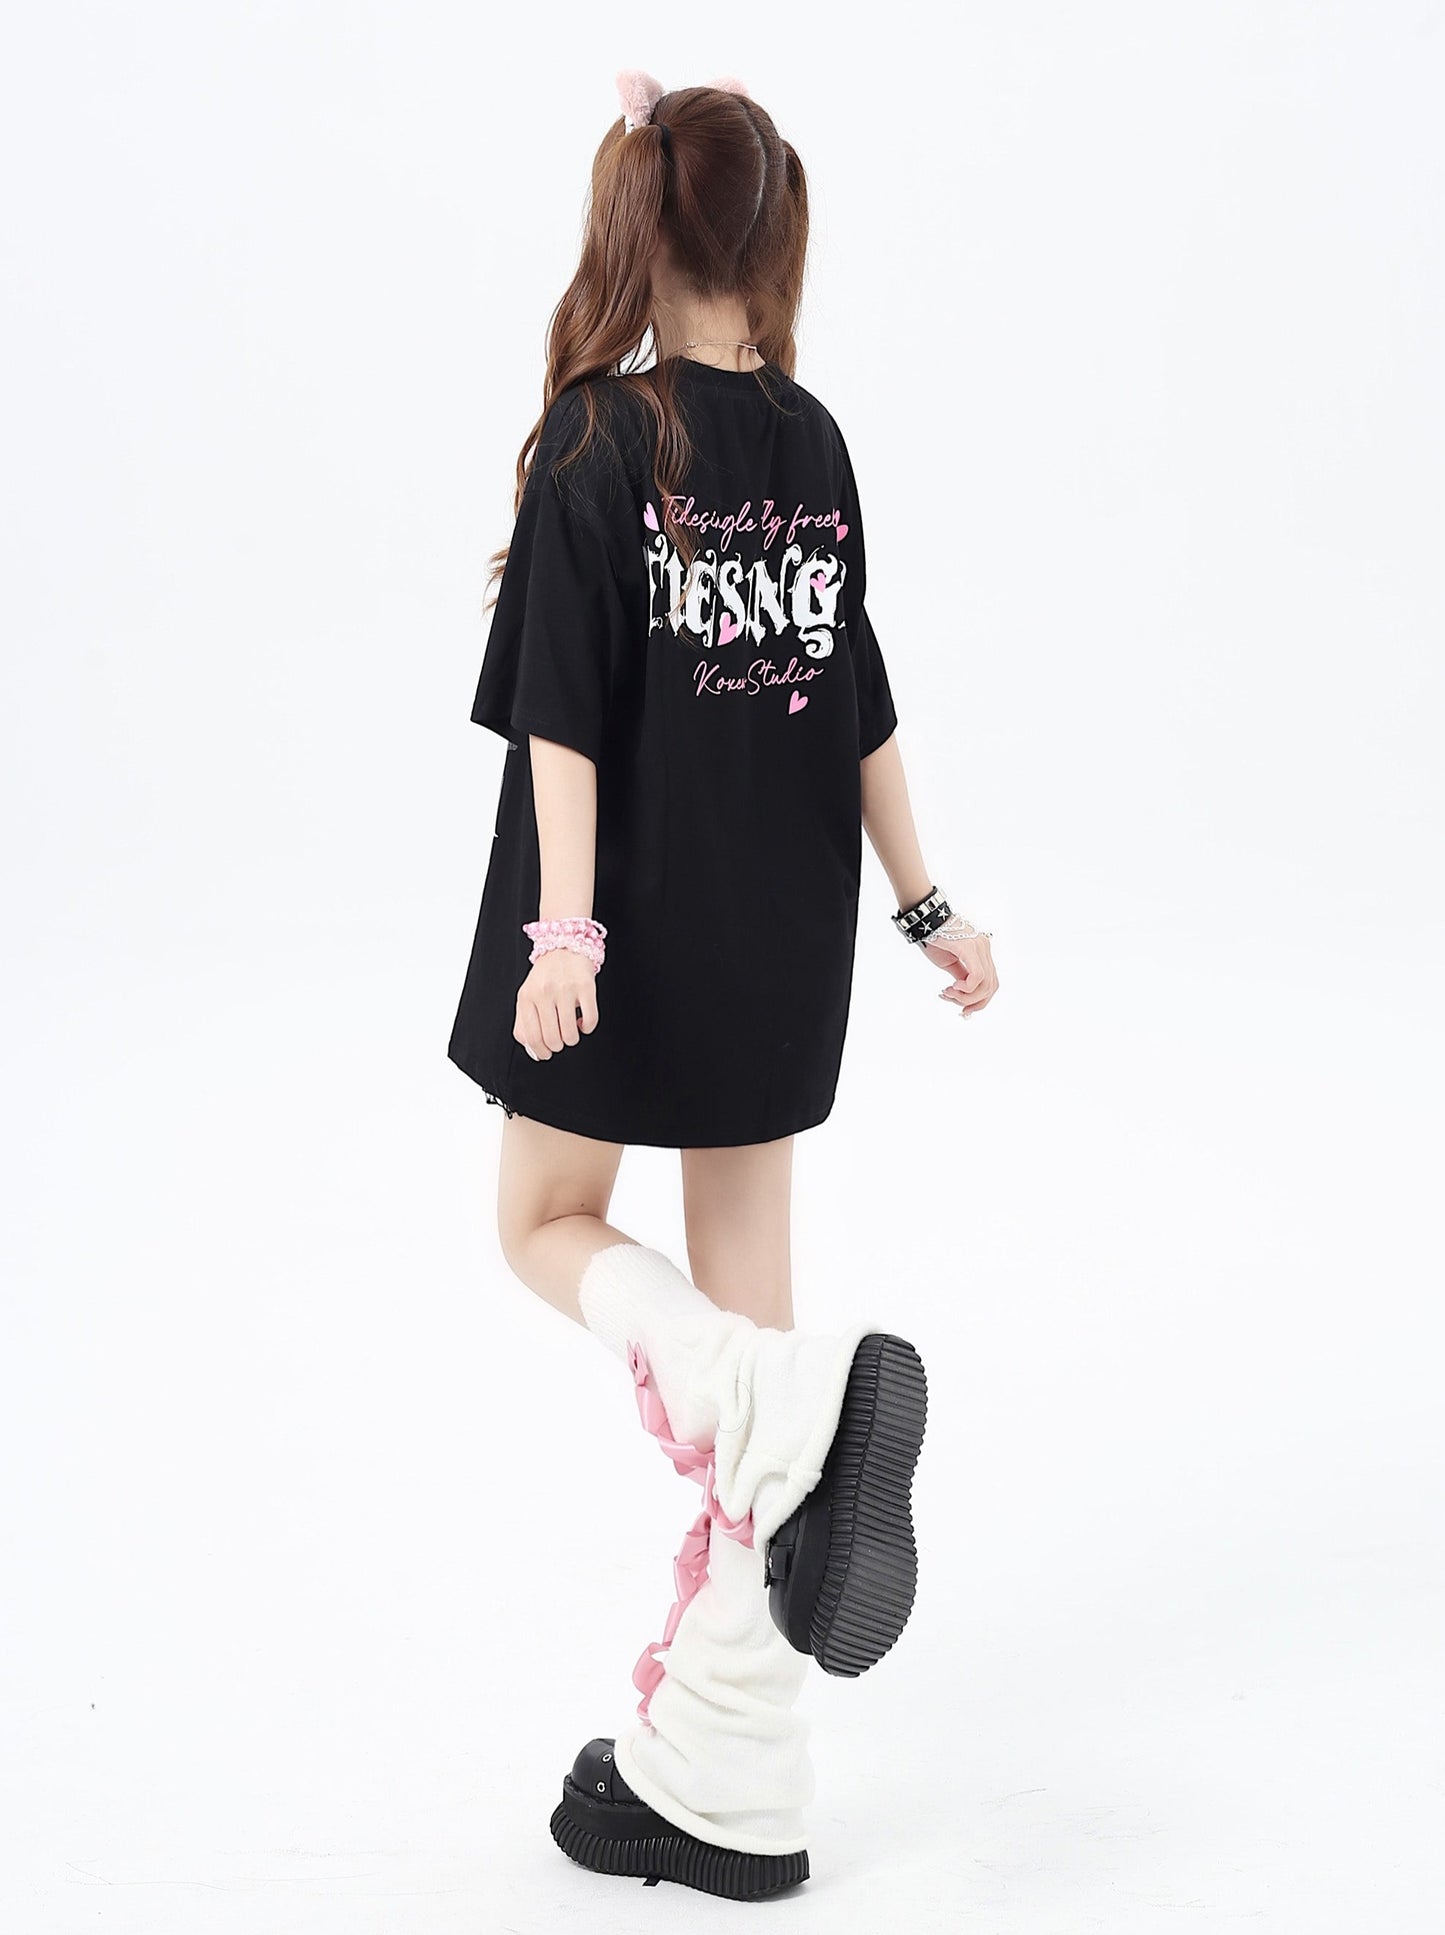 [5.31 limited time 95% off] American bow print street sweet cool short sleeve summer casual loose and versatile T-shirt